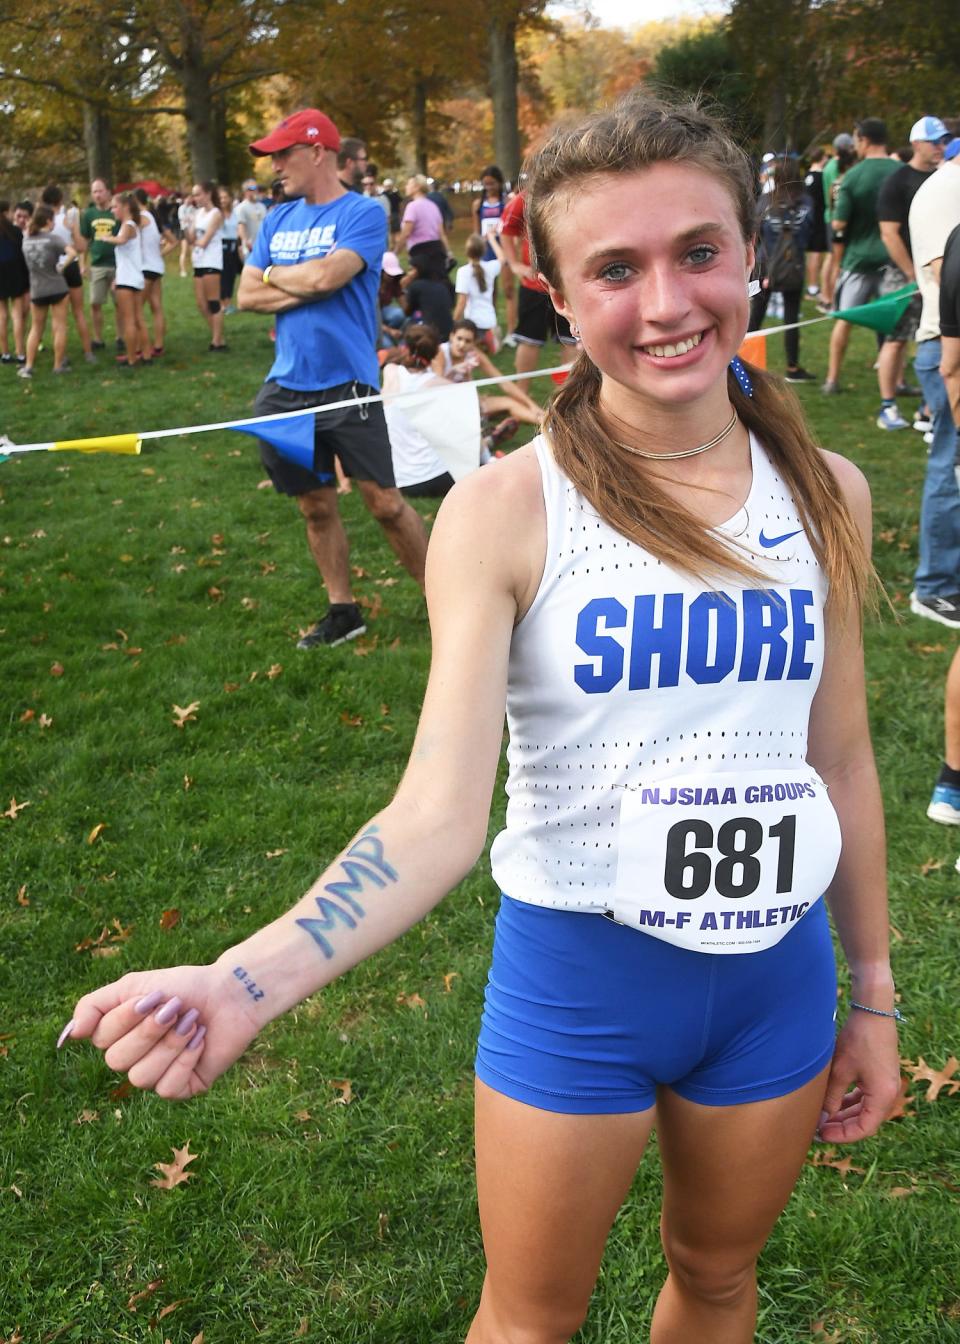 Shore Regional's Megan Donlevie displays the letters "MMP" on her forearm in honor of longtime coach Mel Ullmeyer